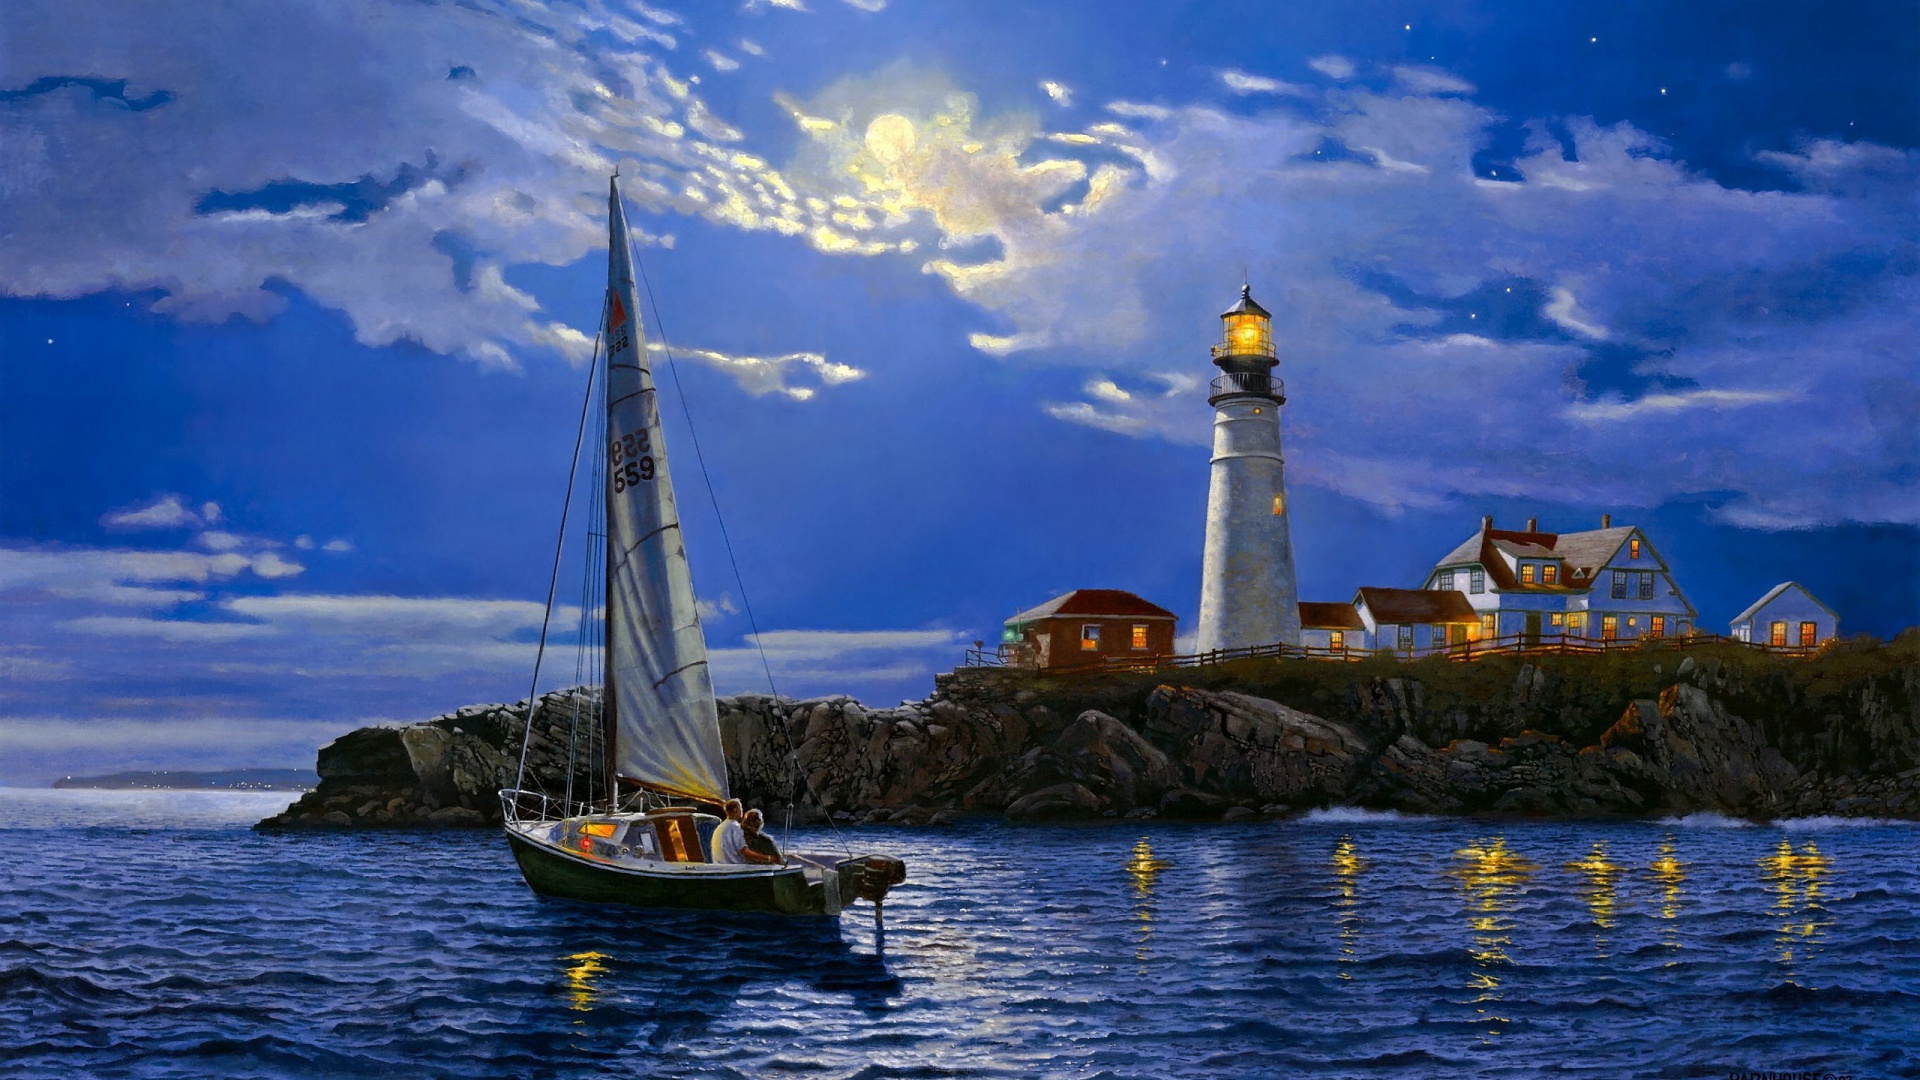 art, Paintaings, Love, Romance, Sailing, Boats, Architecture, Lighthouse, Night, Mood, Sky, Clouds, Moon Wallpaper